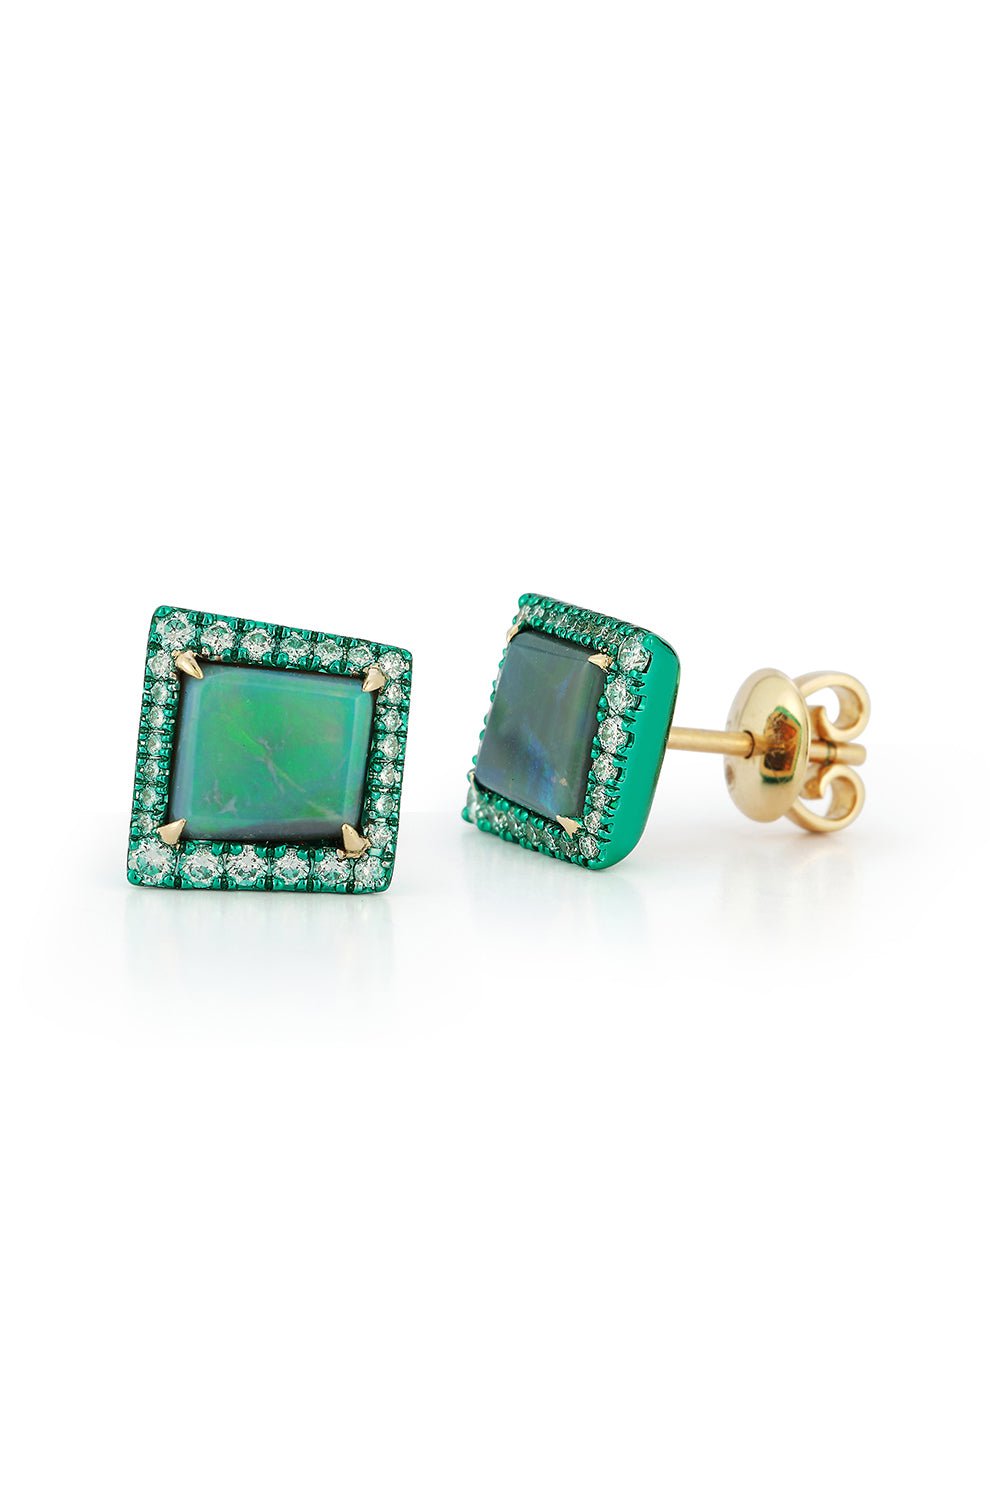 KATHERINE JETTER-Square Opal Stud Earrings-YELLOW GOLD